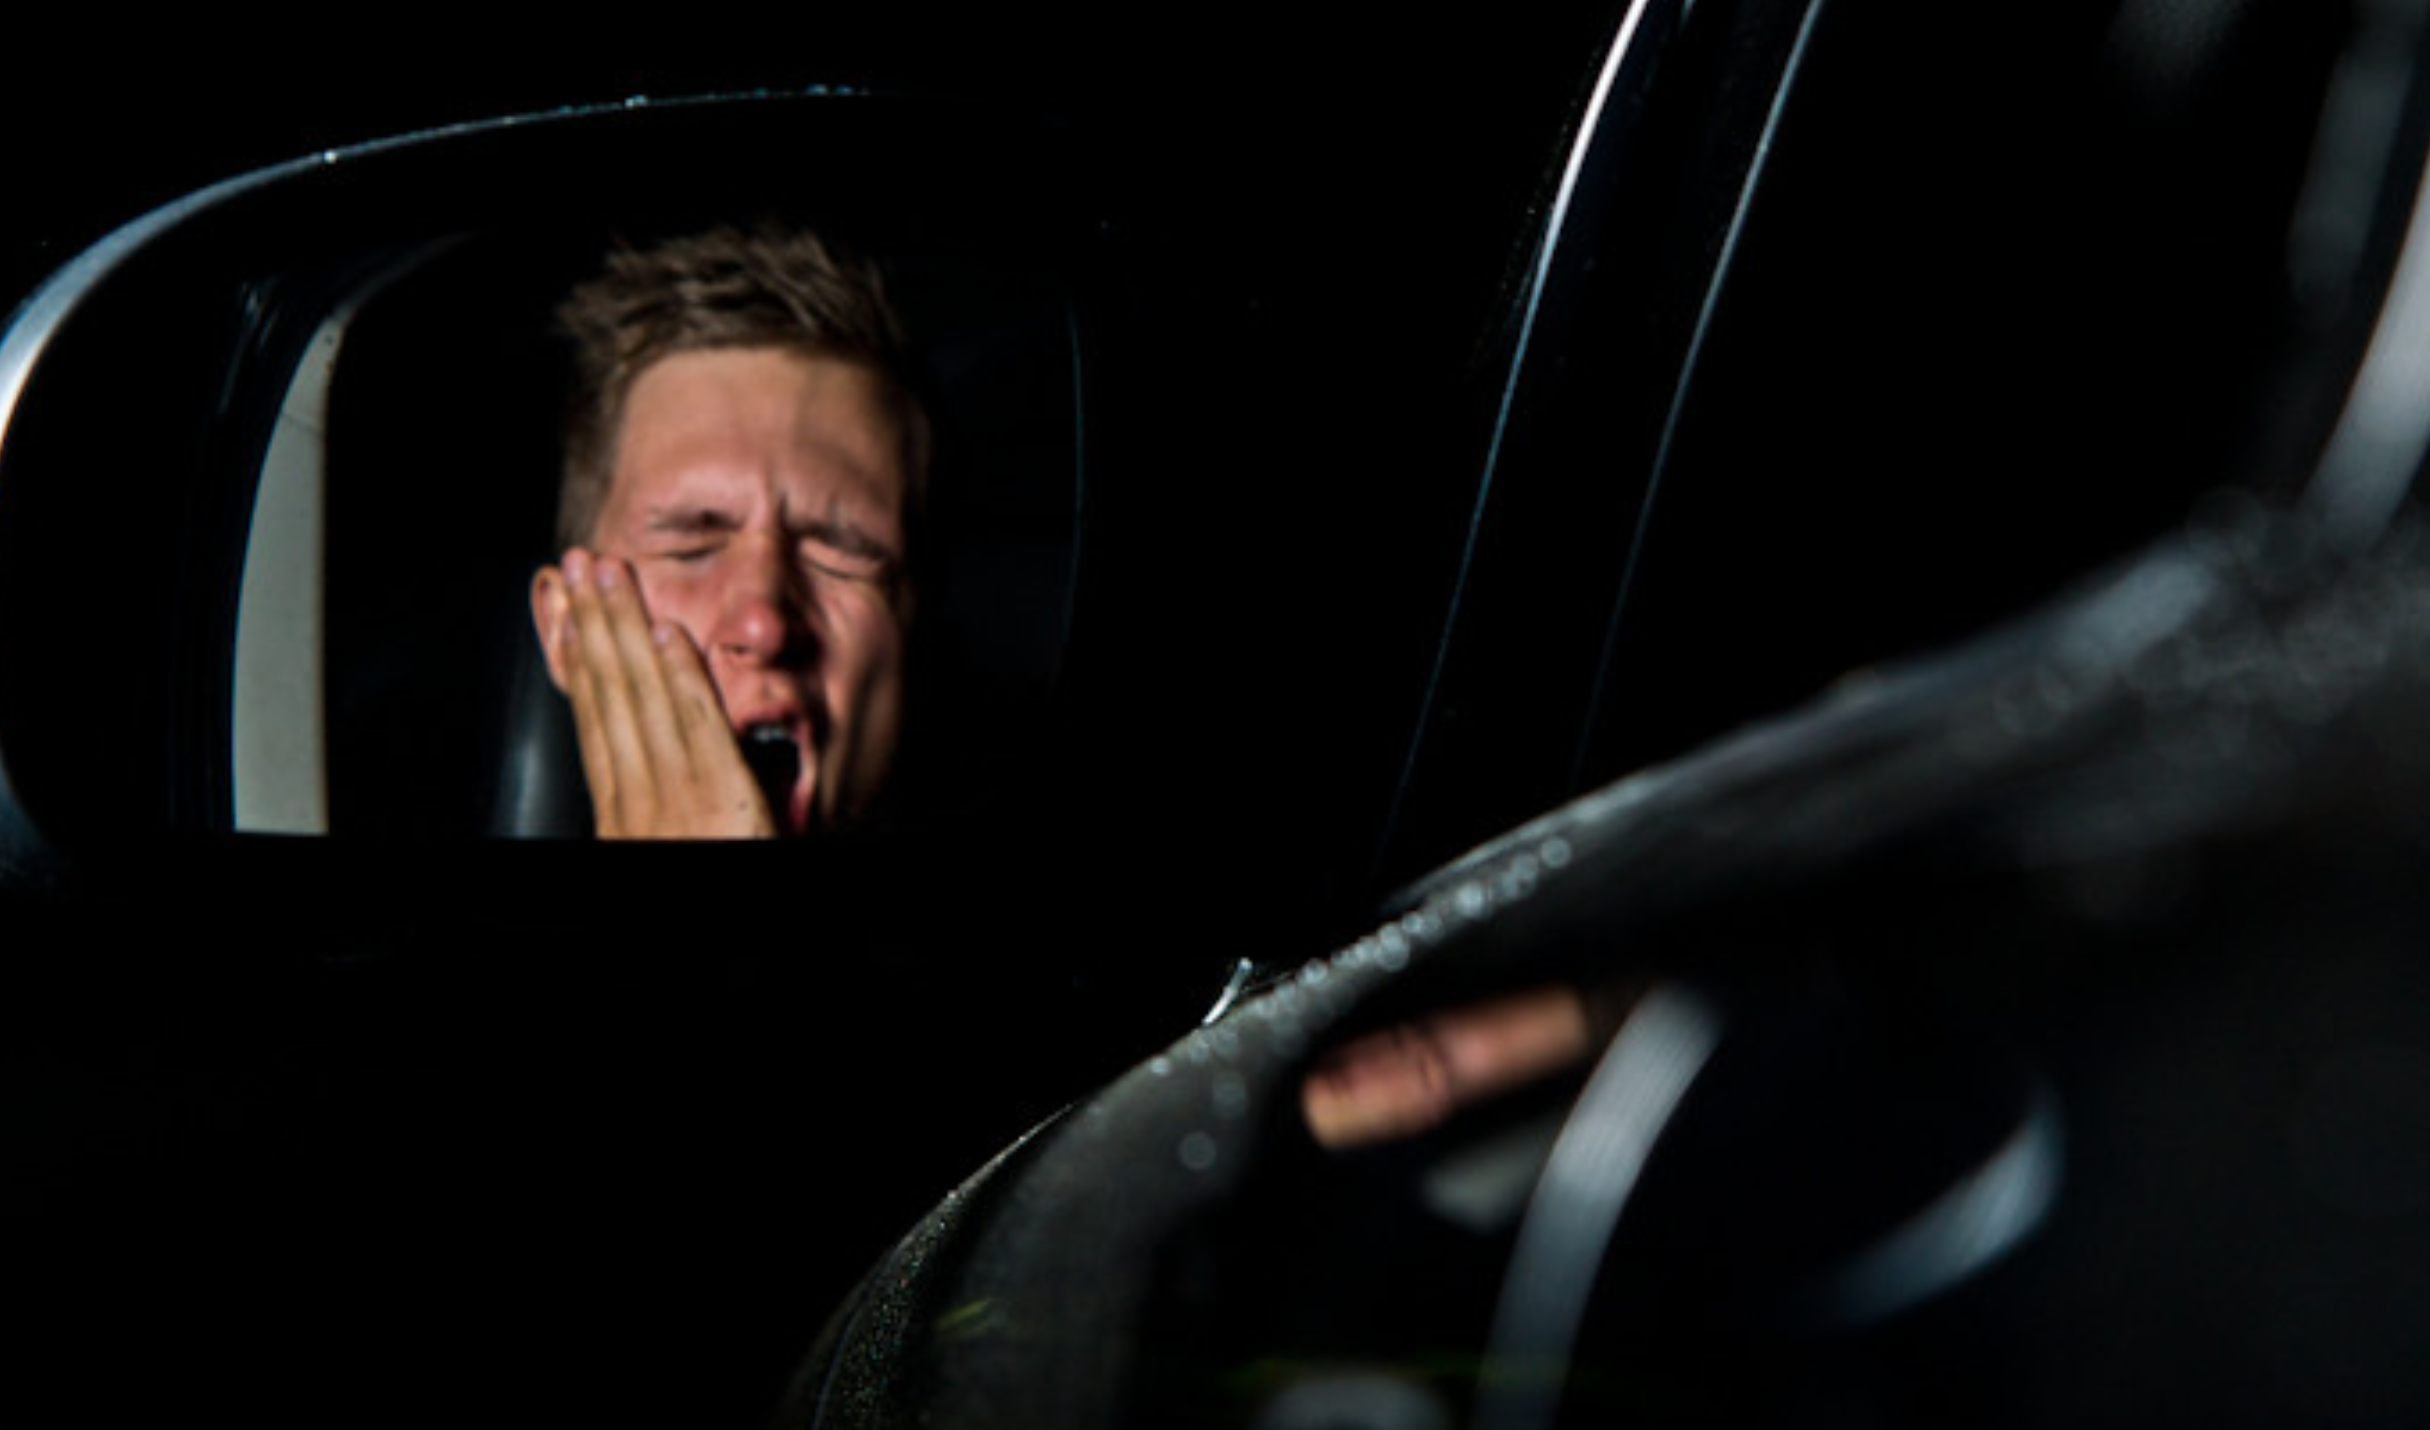 Drowsy Driving Deaths May Be 10x More Frequent Than Official Stats Show